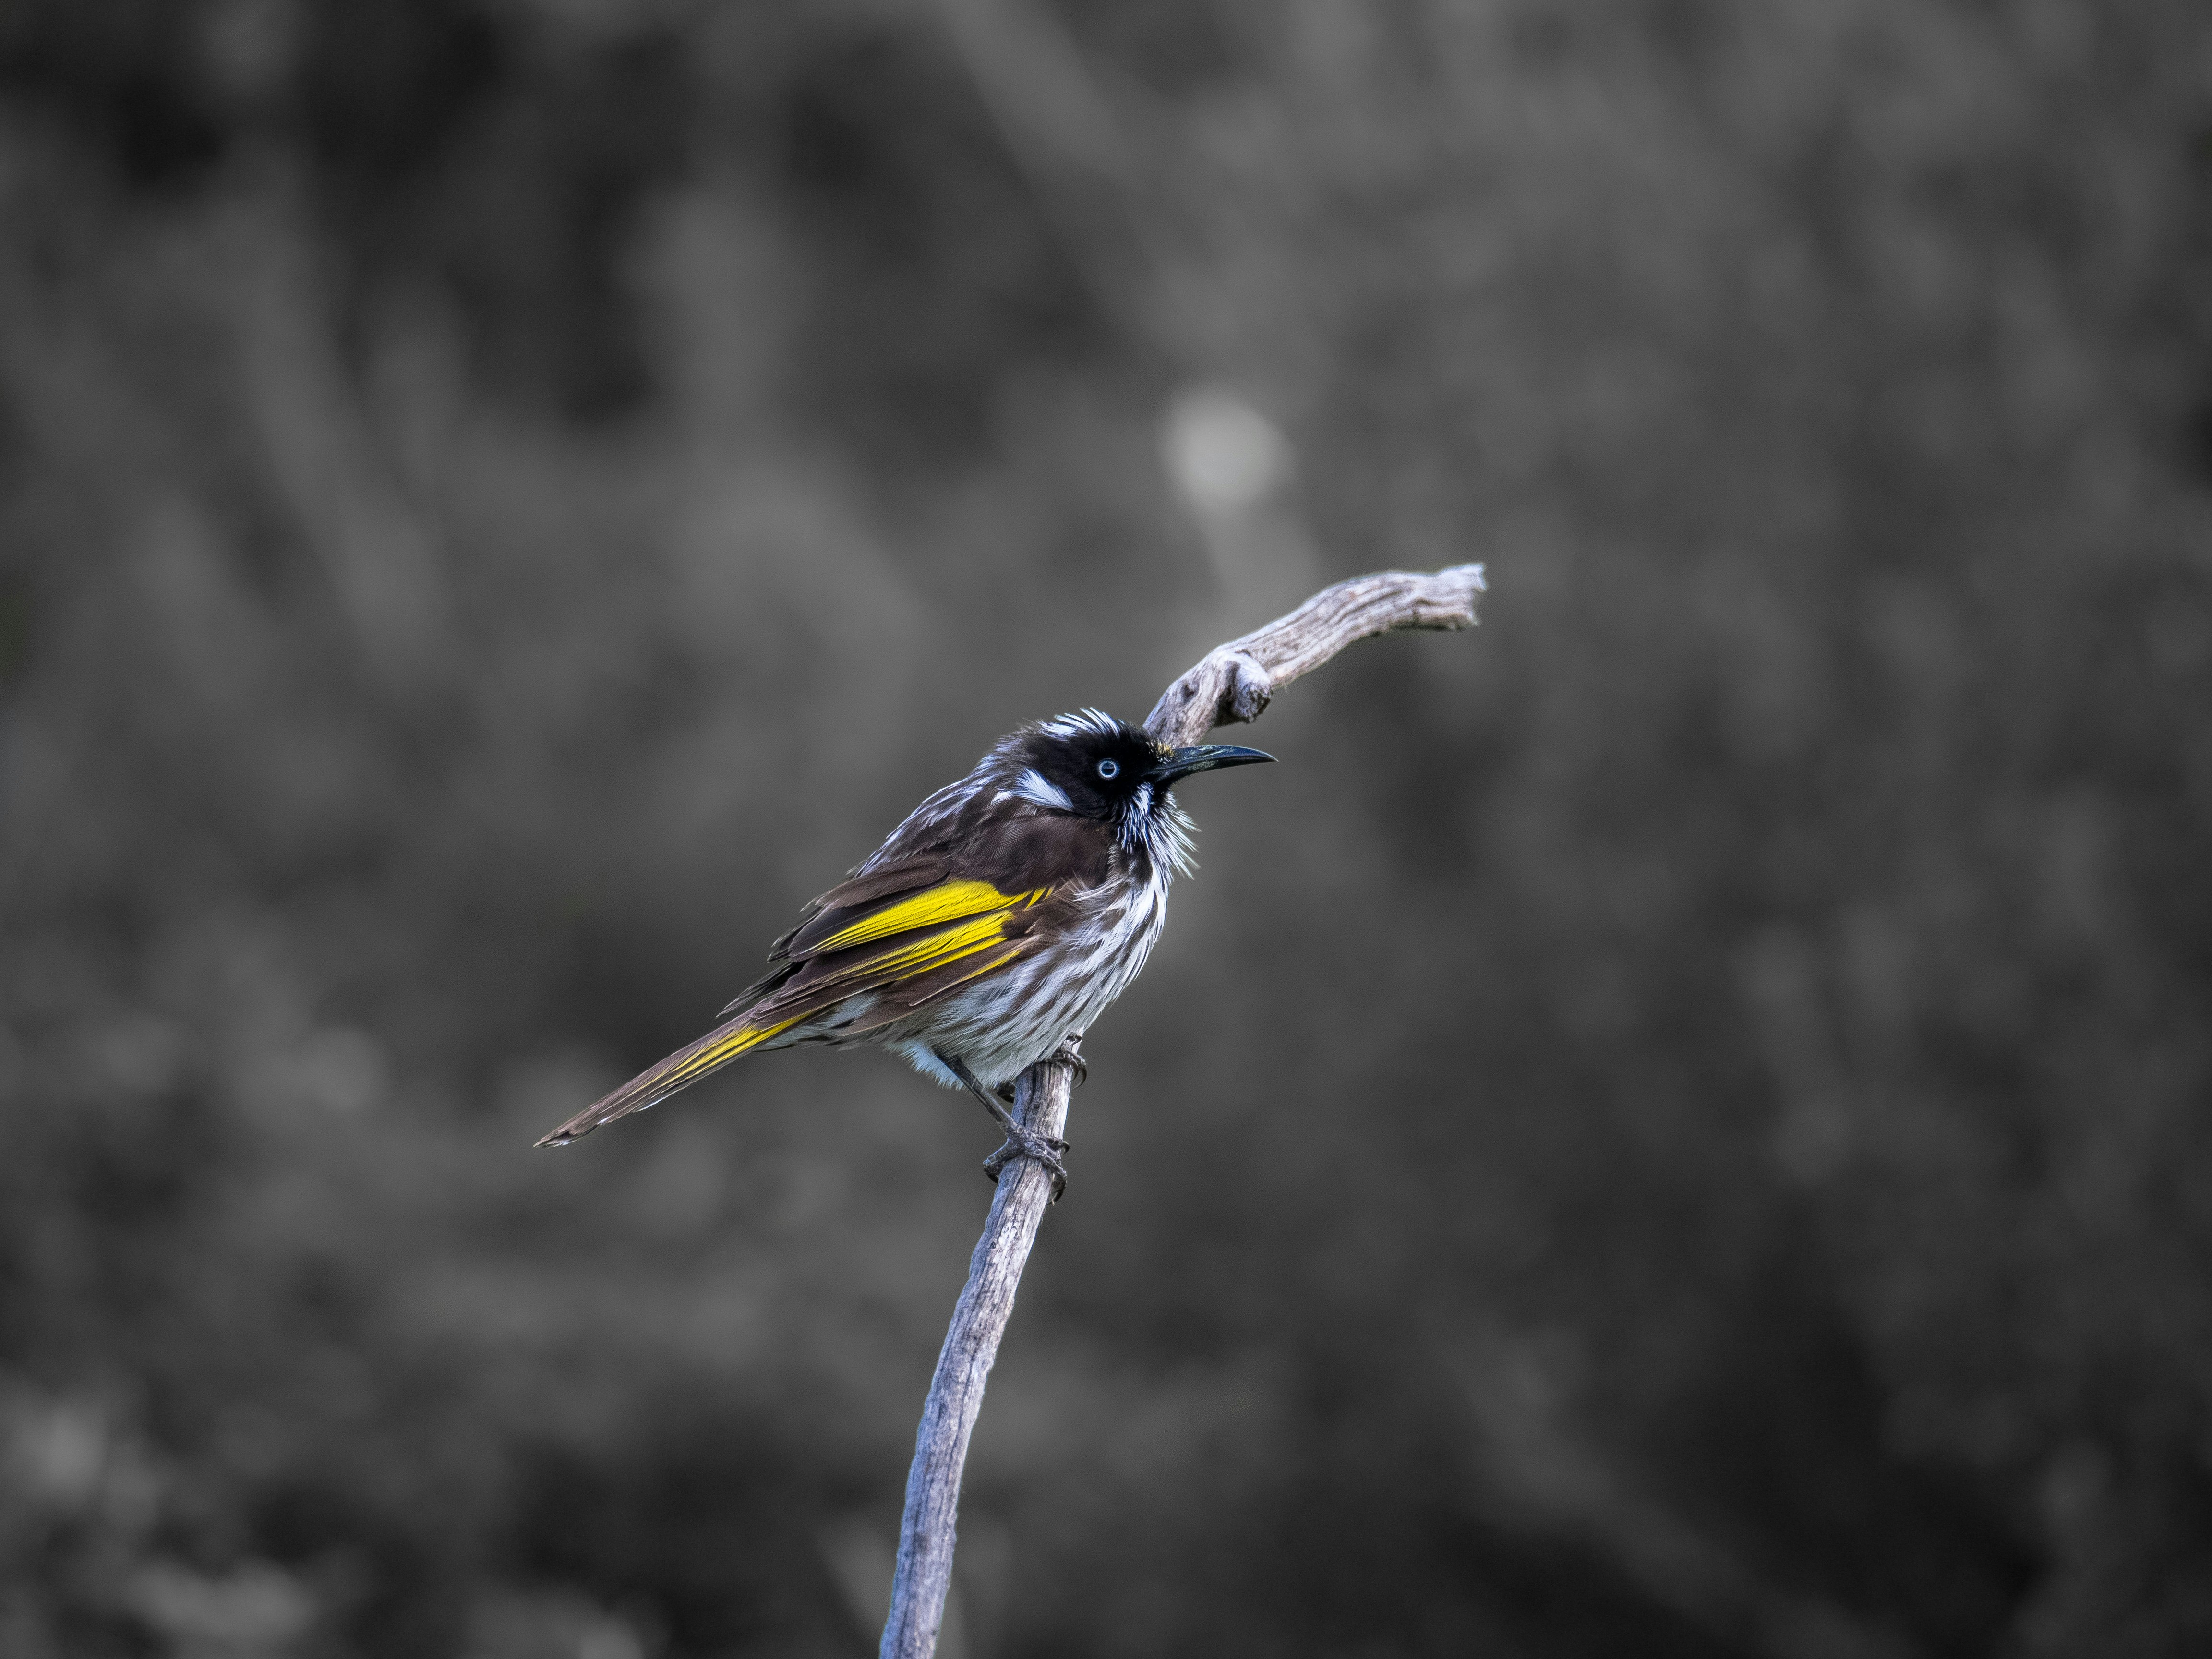 blue and yellow bird on brown tree branch